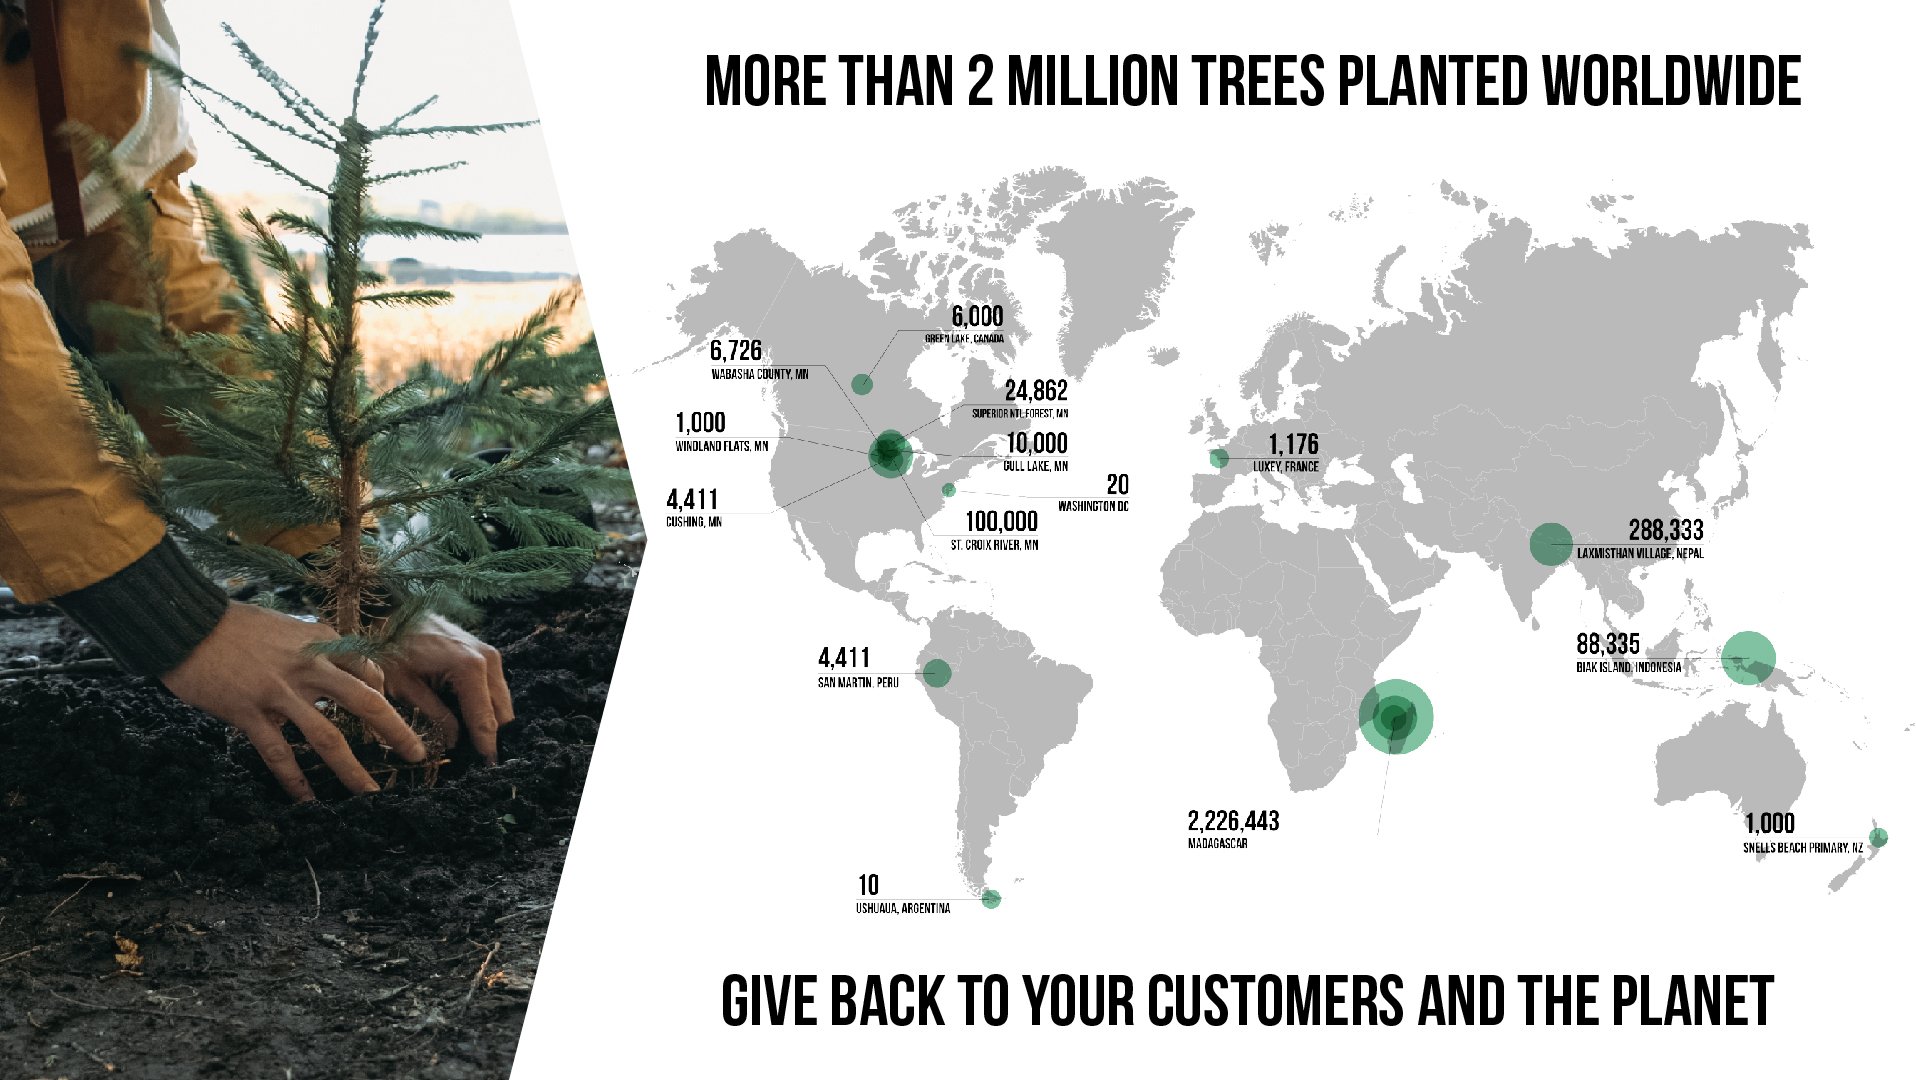 plant a tree for every product